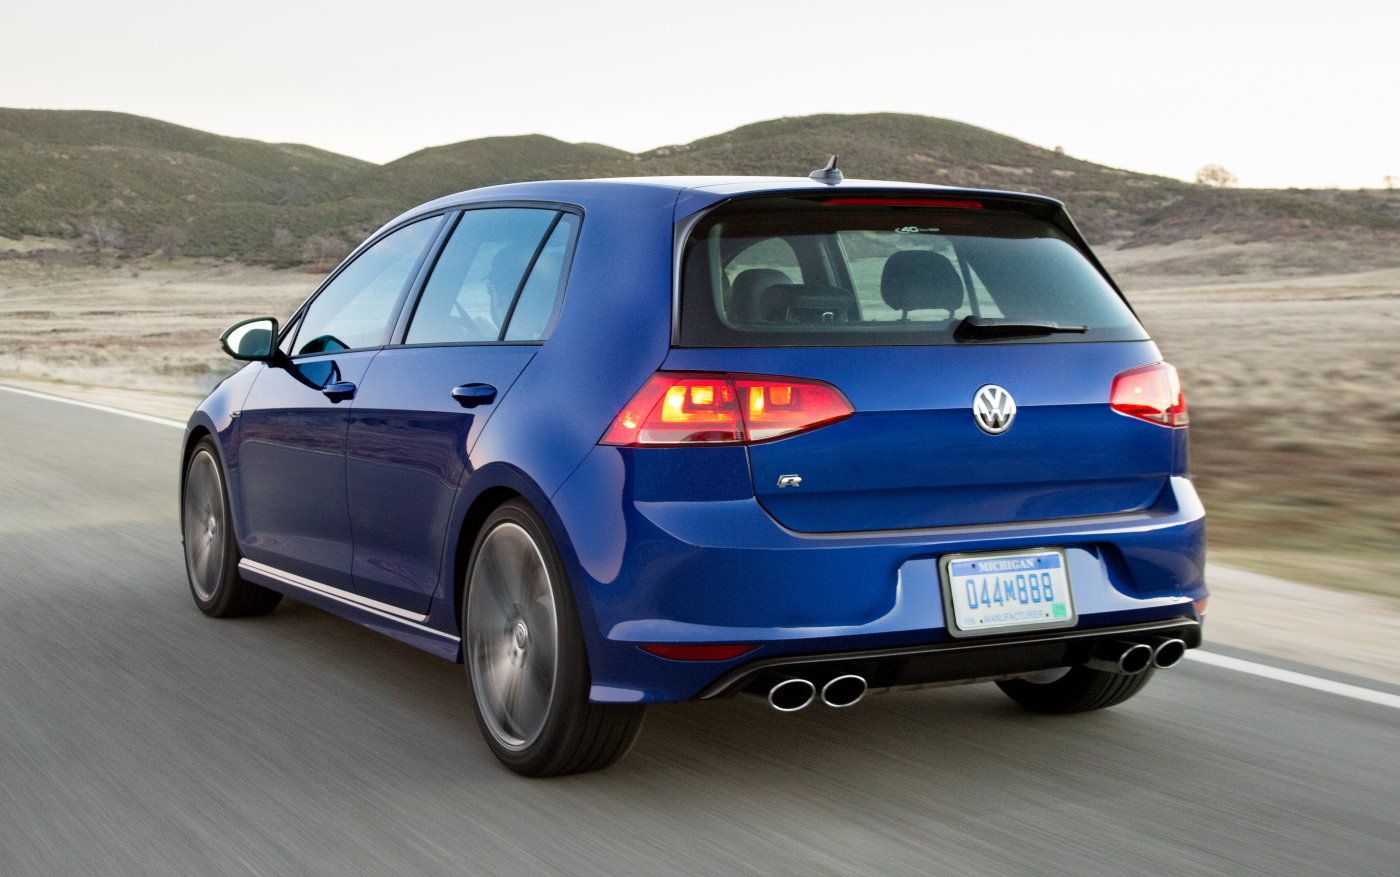 No VW Golf R For 2020 Model Year, But Should Return Following Redesign